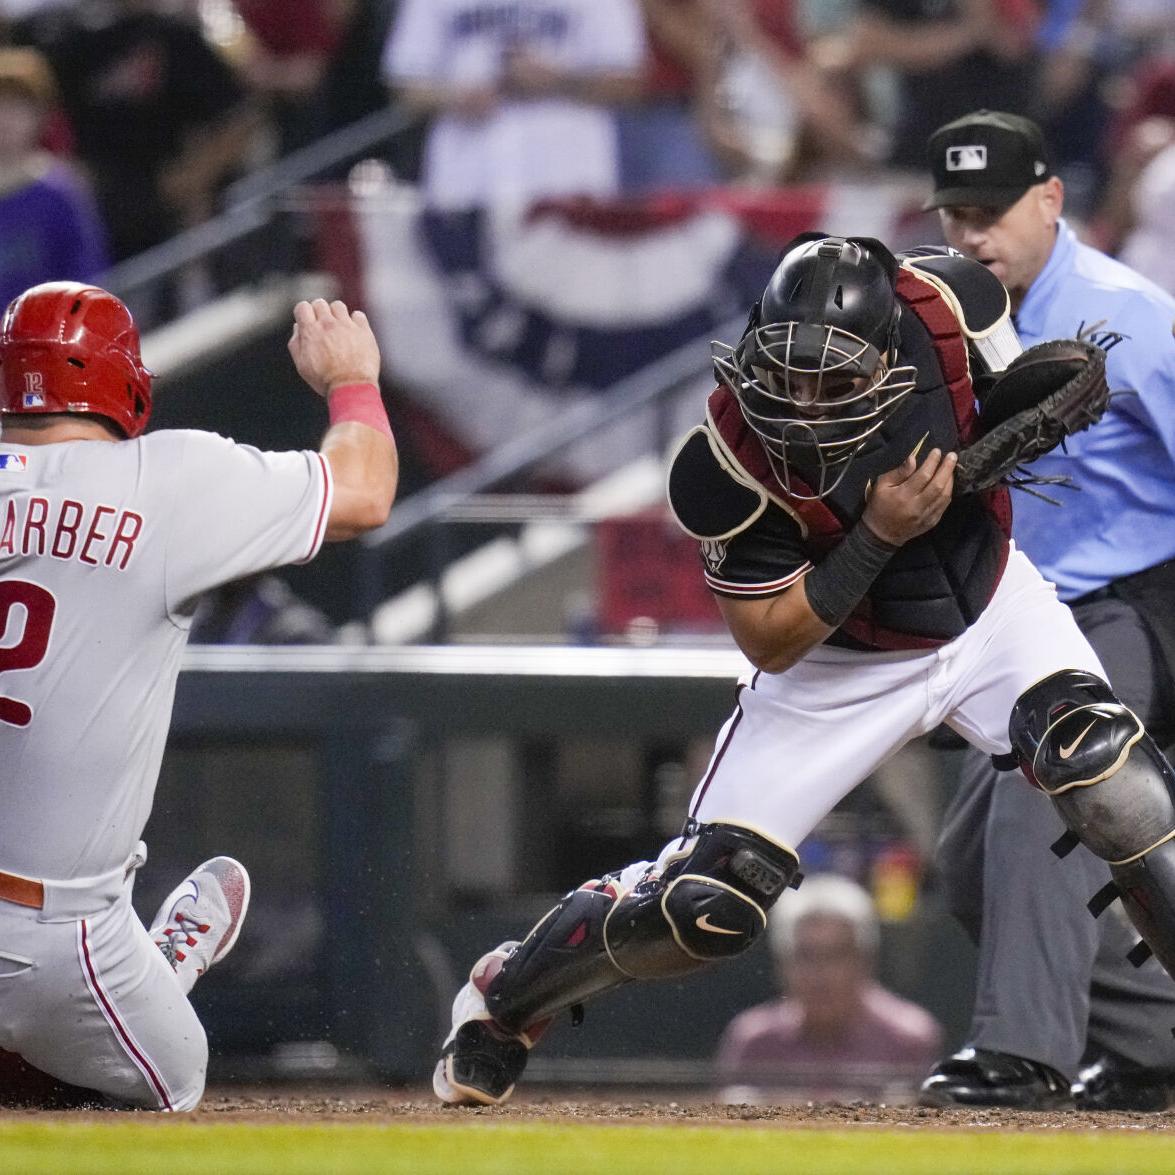 Red Sox: Kyle Schwarber is the greatest defensive first baseman in history